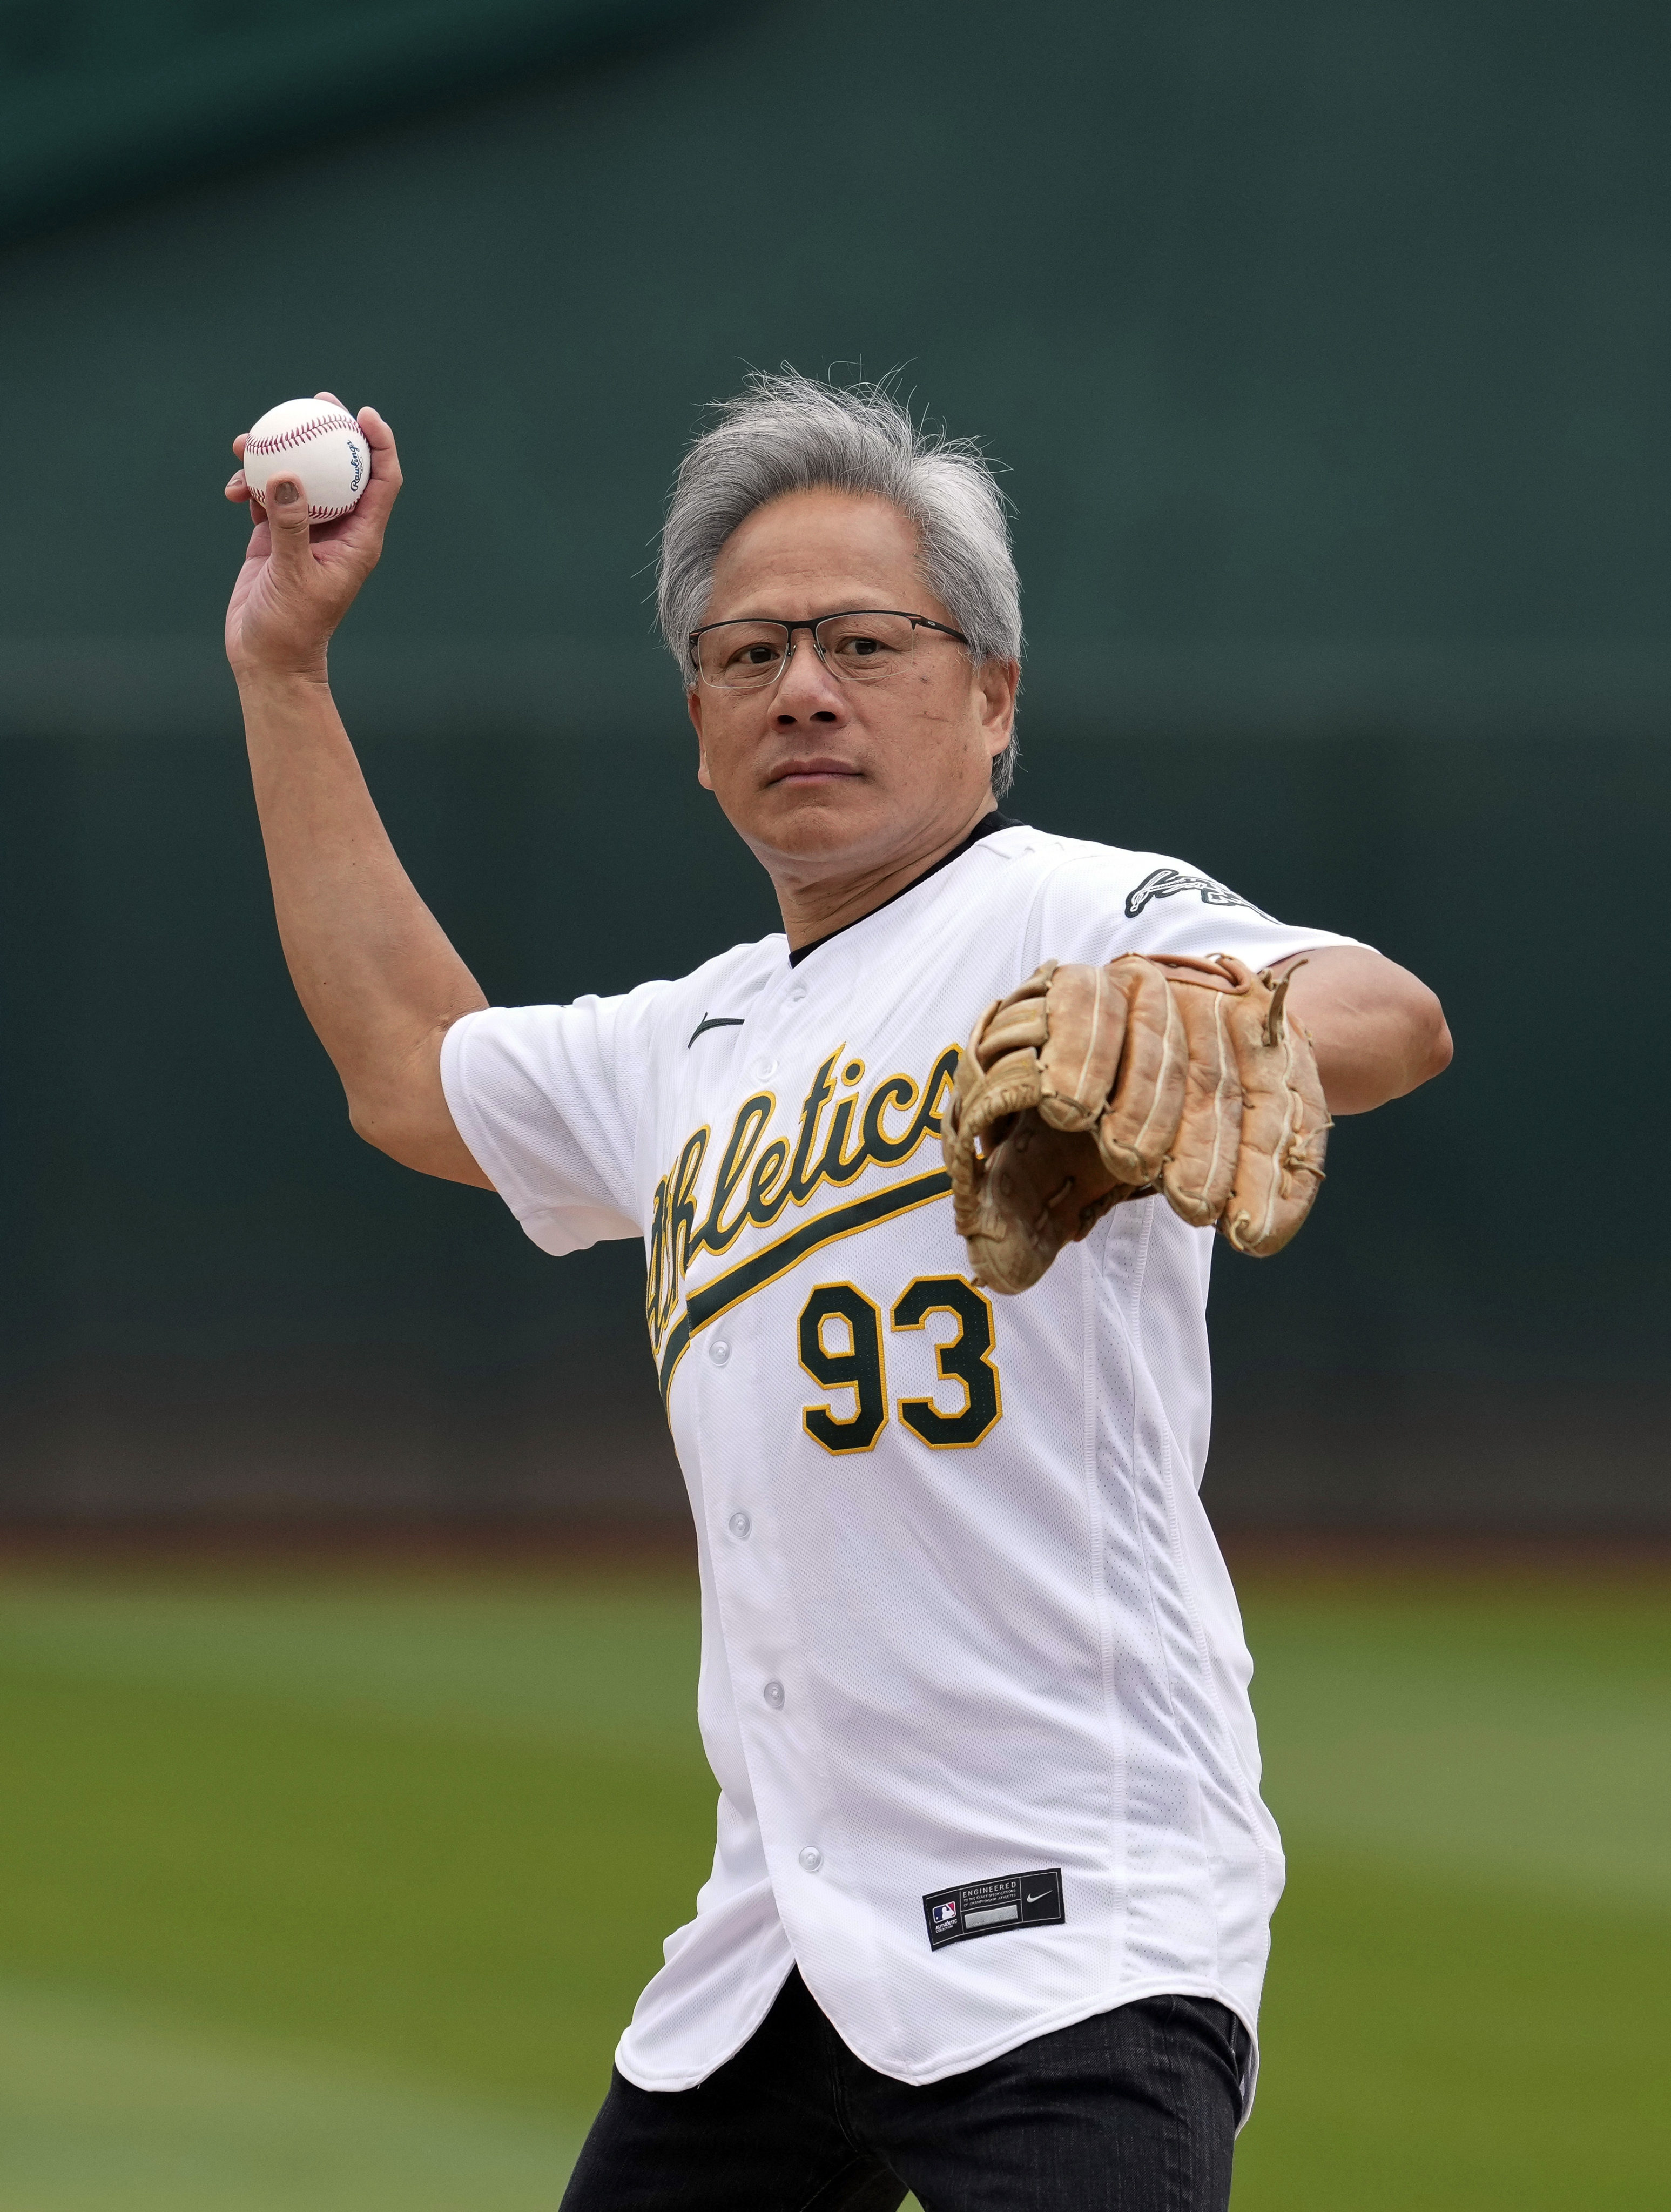 Nvidia founder Jensen Huang threw a ceremonial first pitch during Taiwanese Heritage Day before a baseball game in Oakland, California last Saturday. The CEO is currently on a visit to Taiwan for the island’s Computex tech expo. Photo: AP Photo